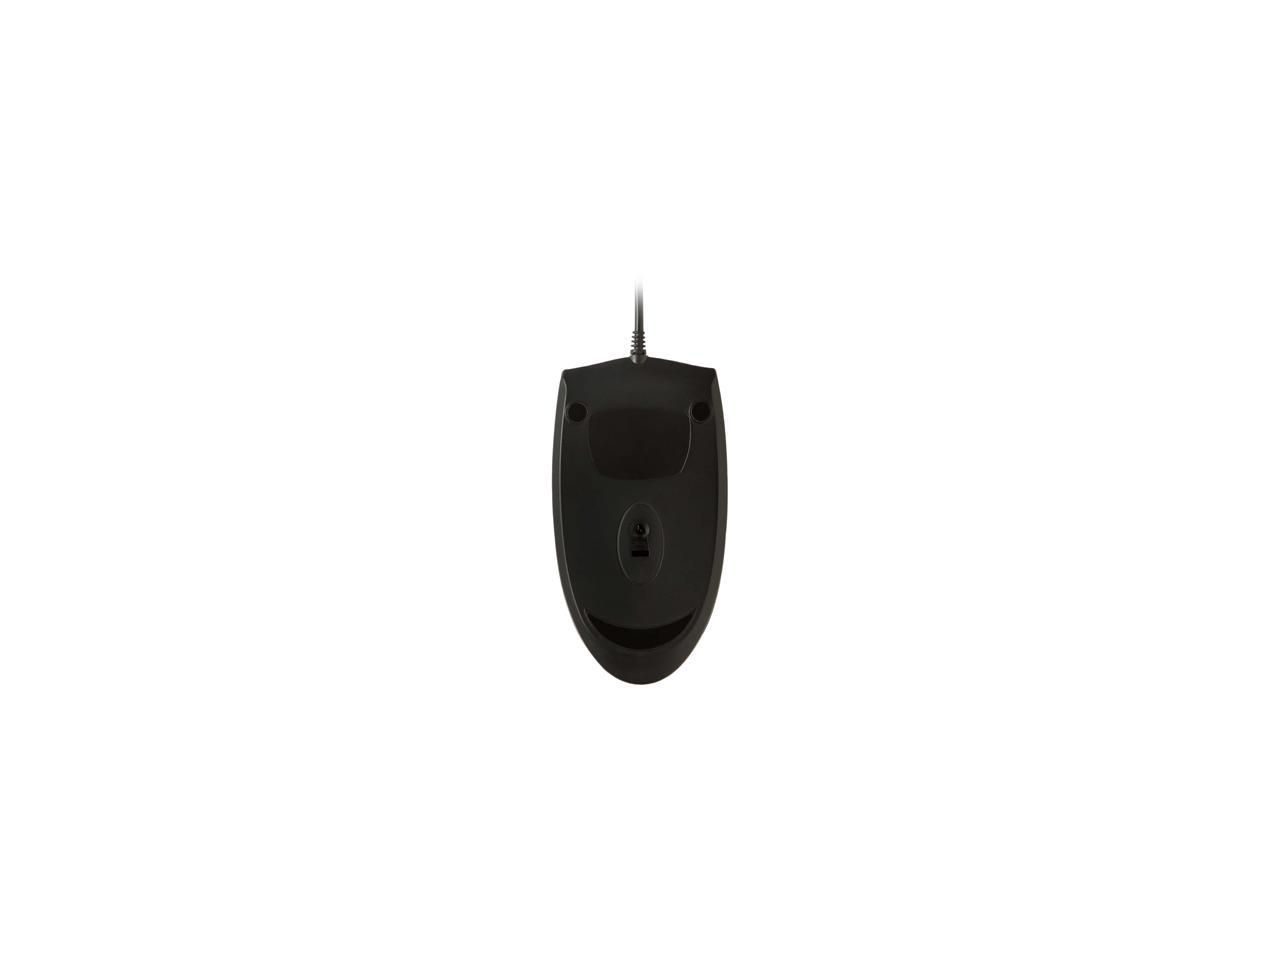 V7 Full size USB Optical Mouse MV3000010-5NC Silver/Black 3 Buttons 1 x Wheel USB Wired Optical 1000 dpi Mouse